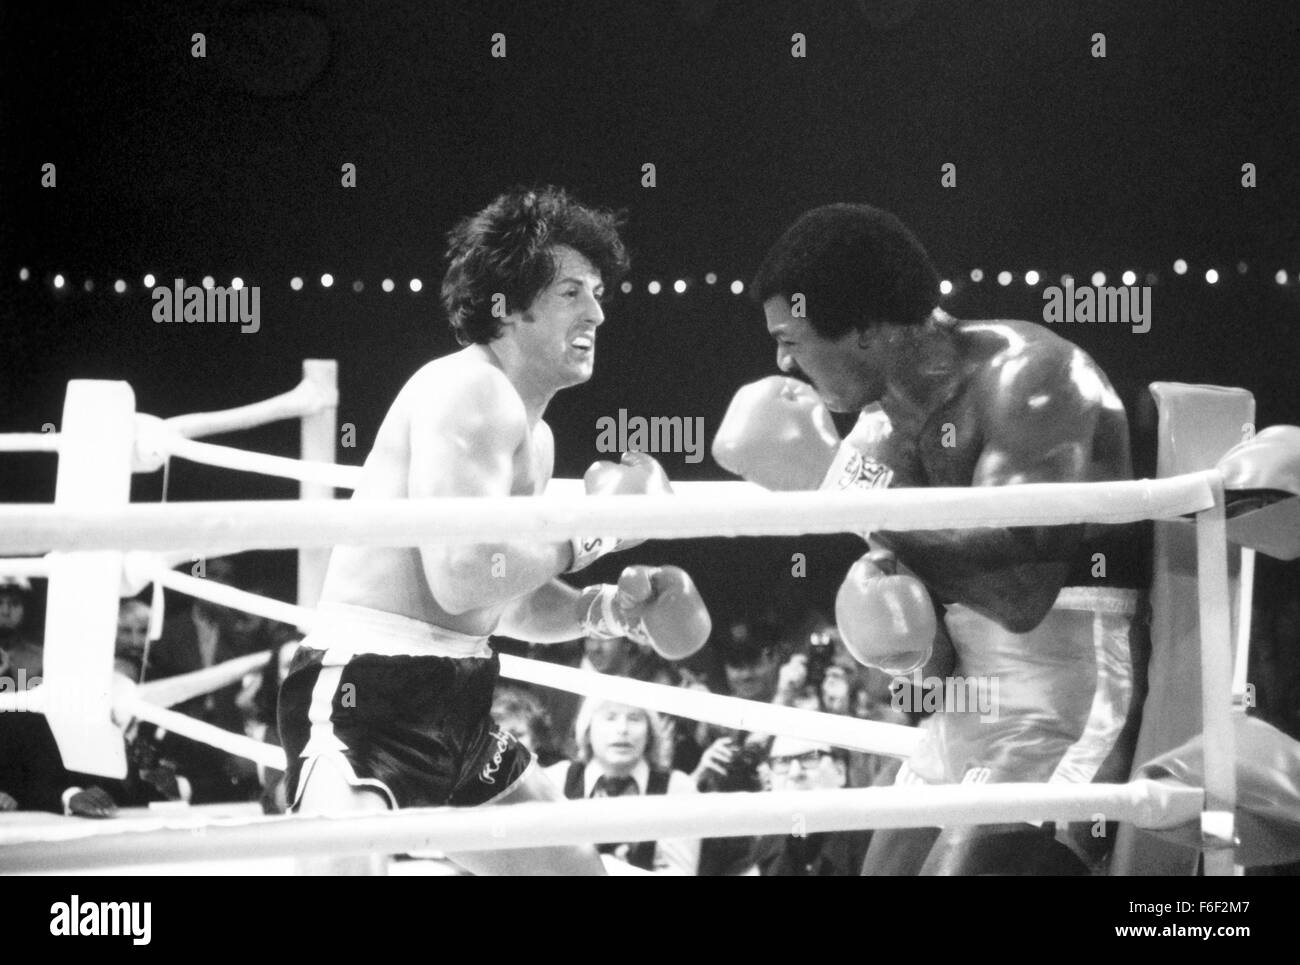 Jun 15, 1979; Philadelphia, PA, USA; SYLVESTER STALLONE (left) as Rocky Balboa and CARL WEATHERS as Apollo Creed in the action, sport, drama 'Rocky II' directed by Sylvester Stallone. Stock Photo